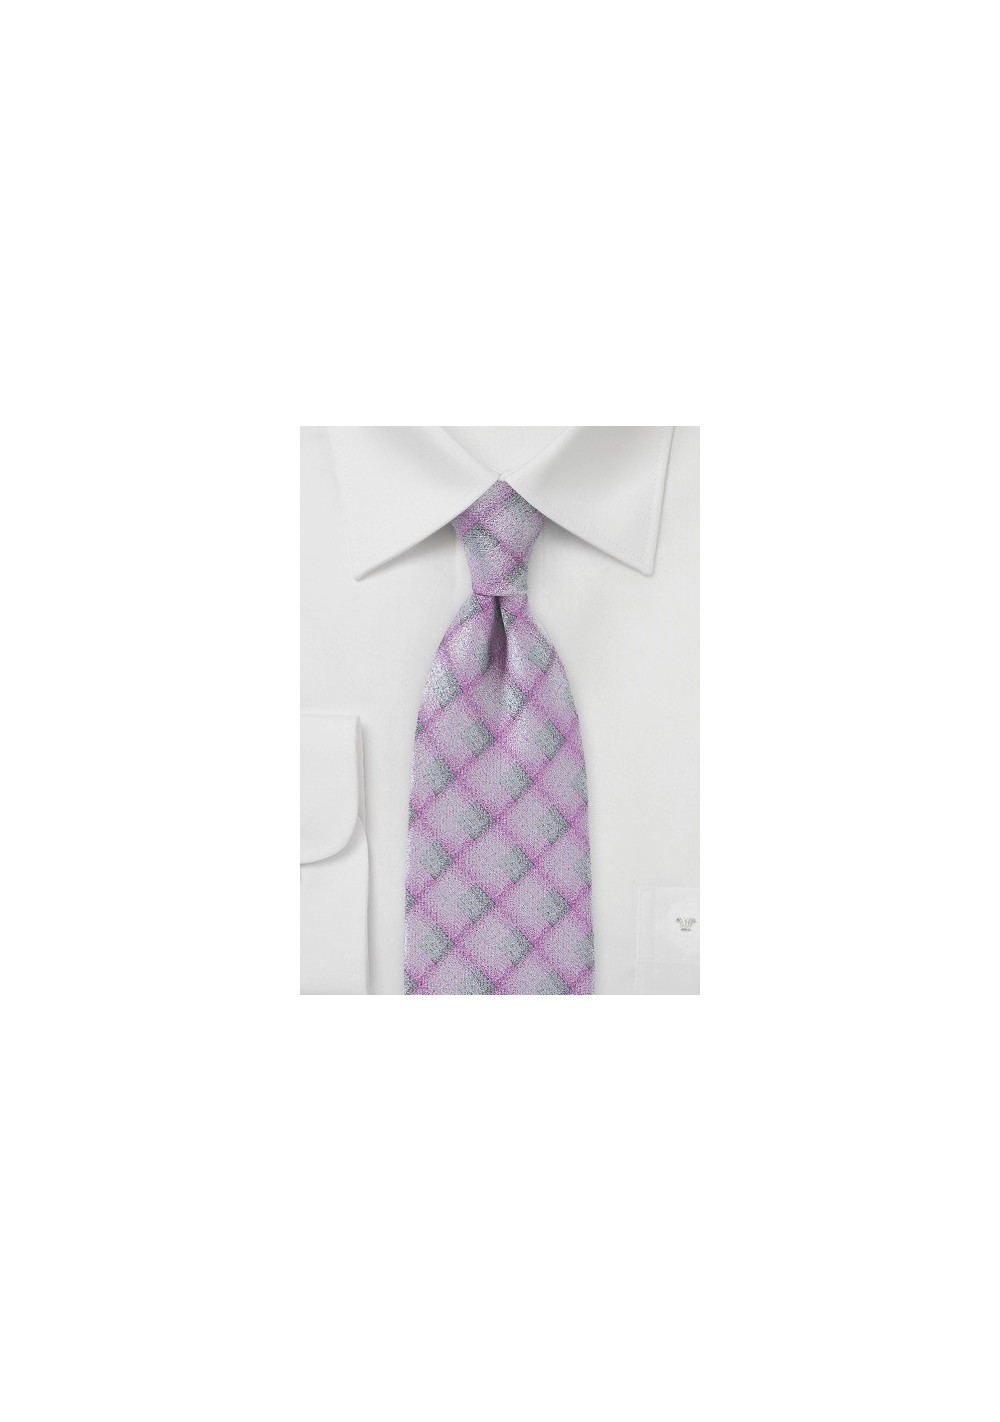 Diamond Patterned Tie in Pinks and Grays